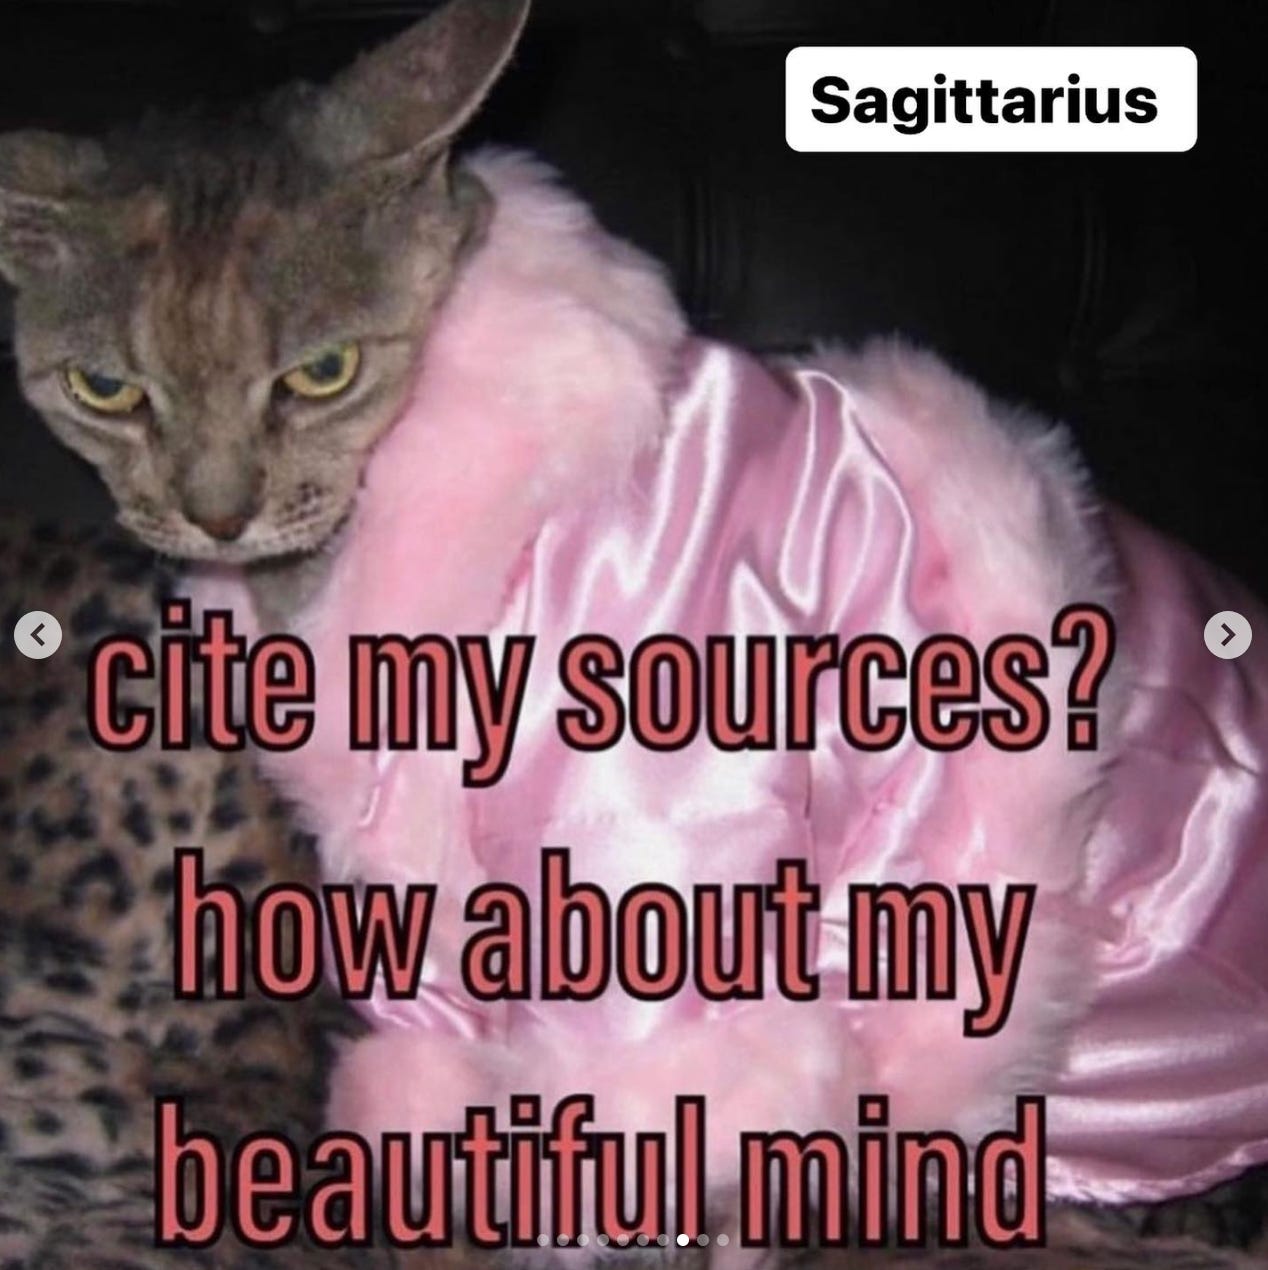 A cat in a pink, fur-lined robe looking angry, underneath the caption "sagitarius" says, "cite my sources? how about my beautiful mind."